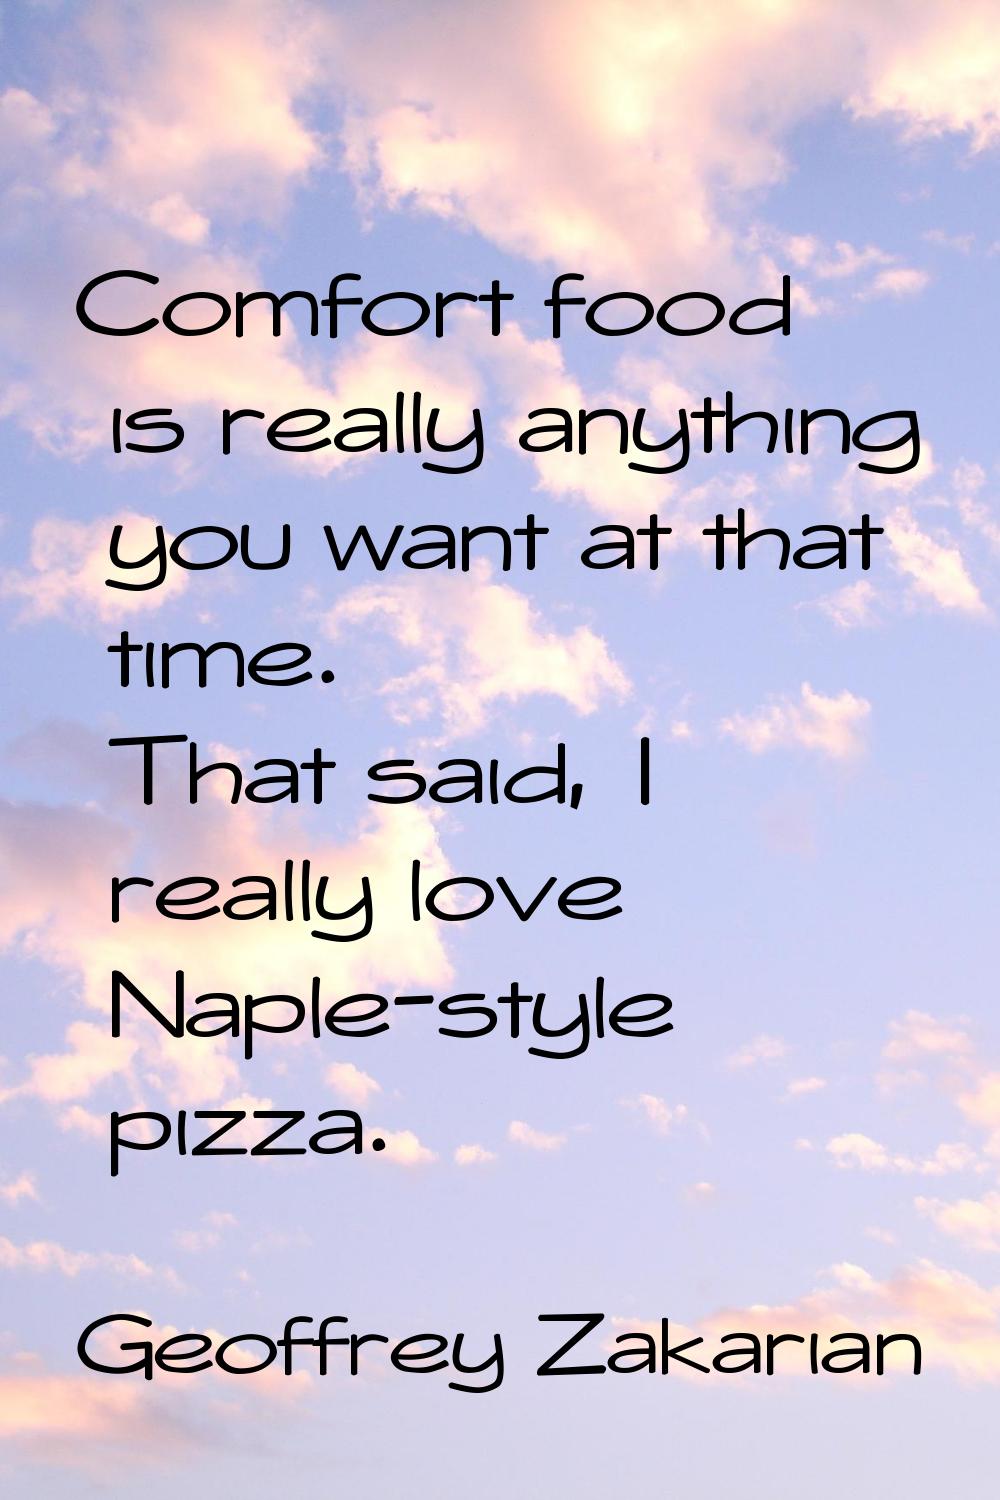 Comfort food is really anything you want at that time. That said, I really love Naple-style pizza.